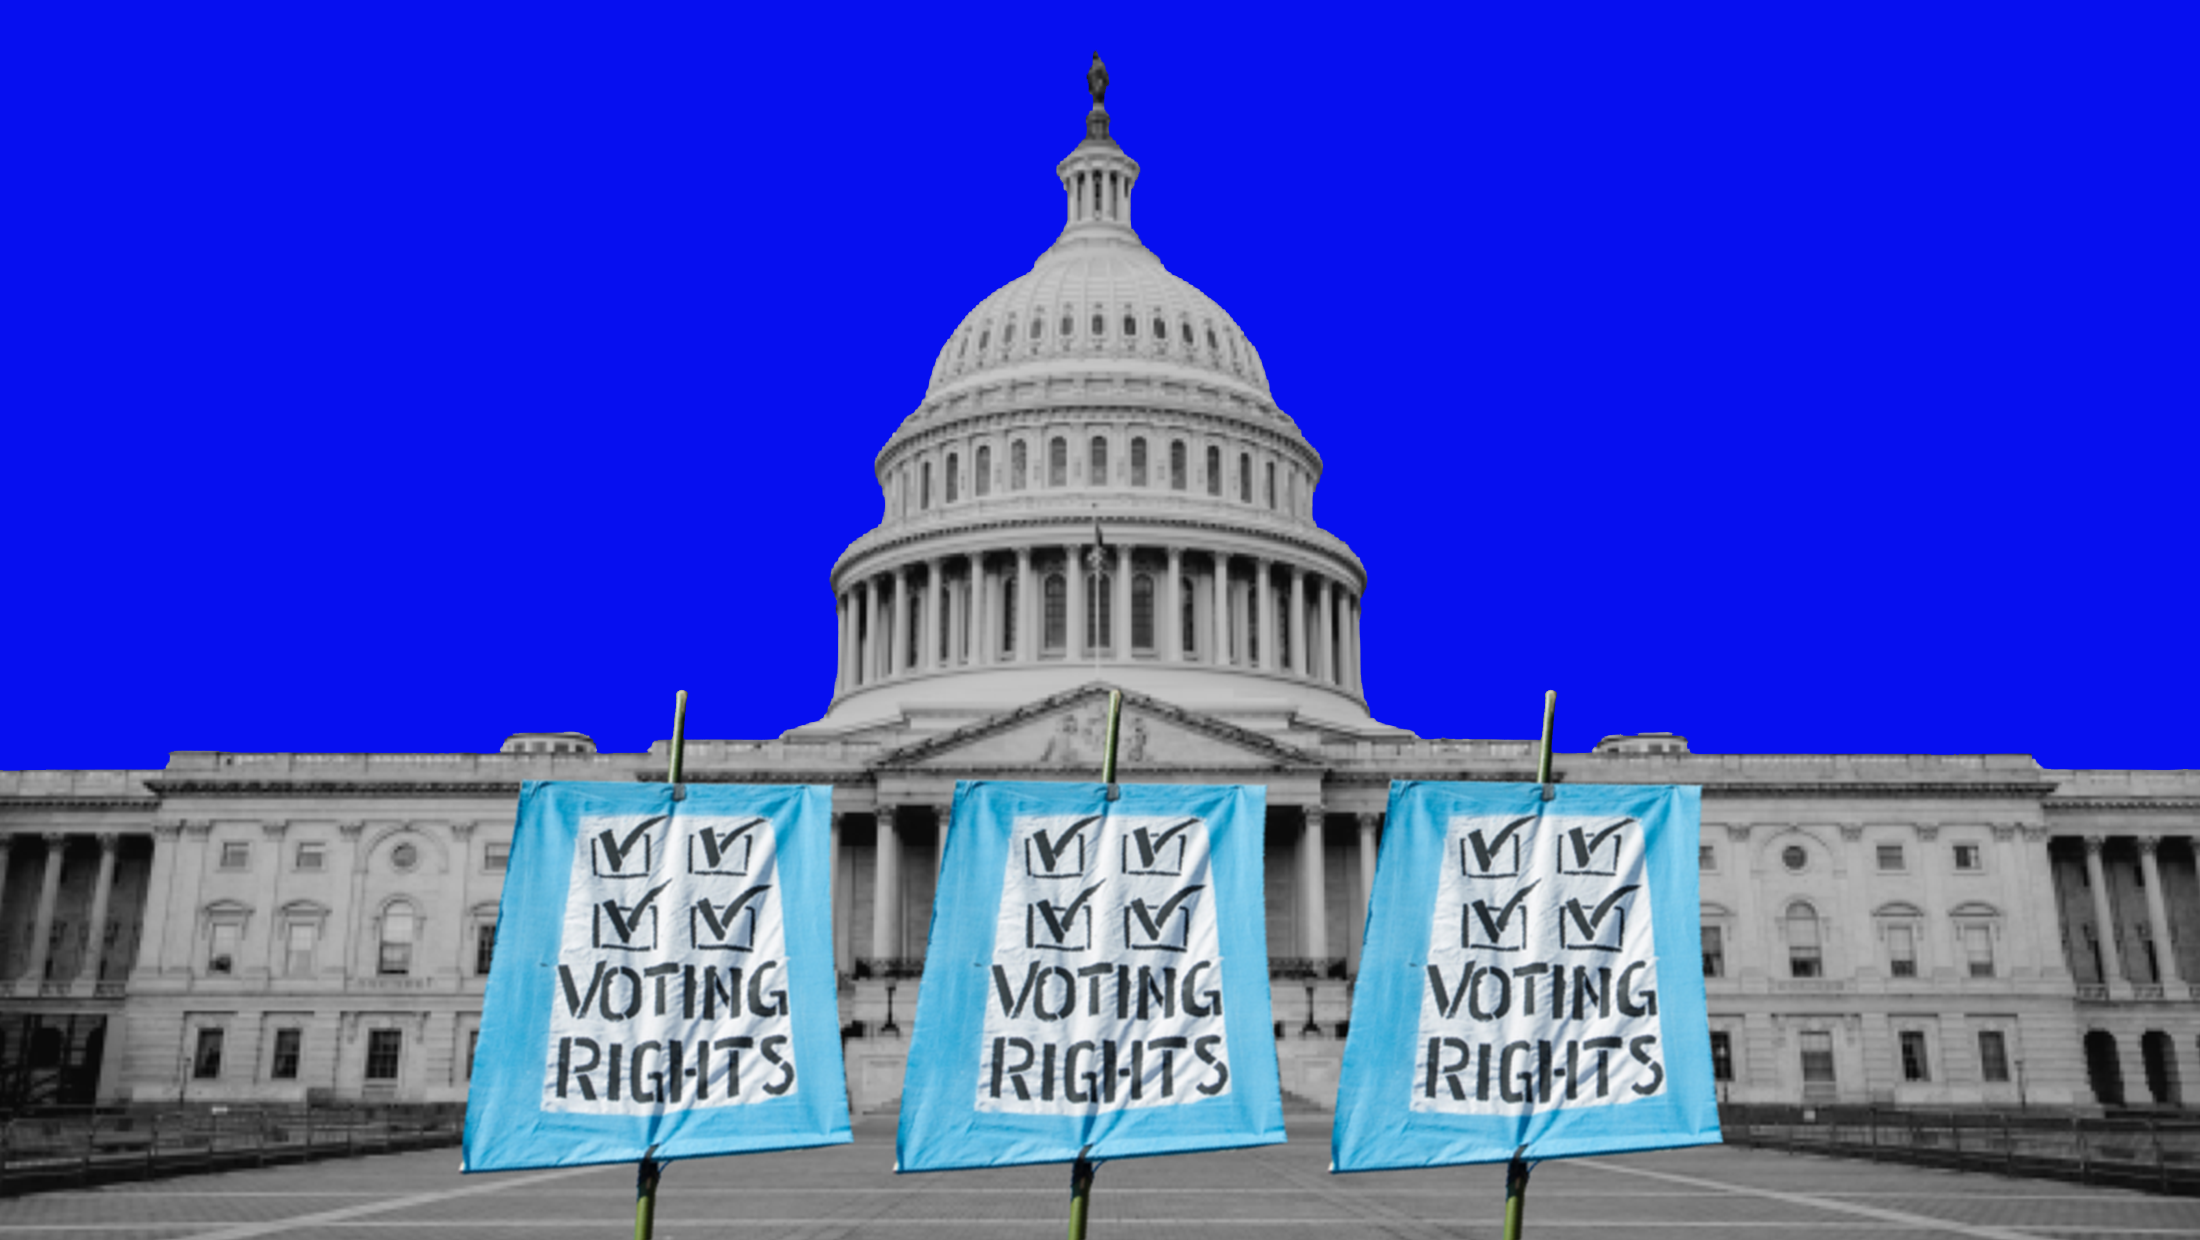 Thee signs that say "Voting Rights" in front of the U.S. Capitol